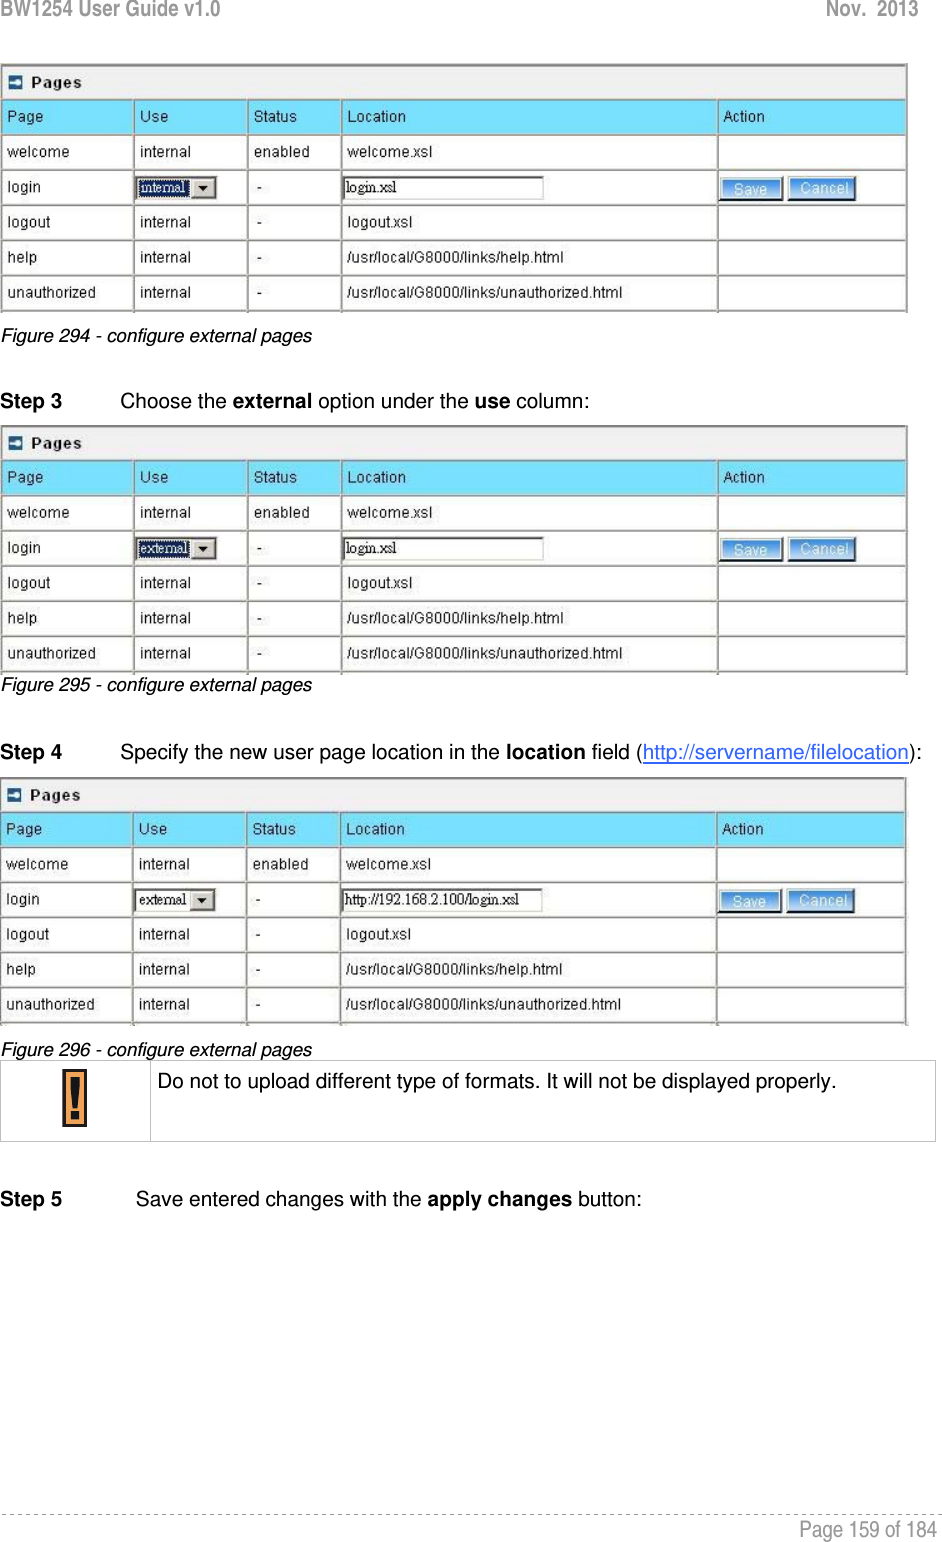 BW1254 User Guide v1.0  Nov.  2013     Page 159 of 184    Figure 294 - configure external pages  Step 3          Choose the external option under the use column:  Figure 295 - configure external pages  Step 4          Specify the new user page location in the location field (http://servername/filelocation):   Figure 296 - configure external pages  Do not to upload different type of formats. It will not be displayed properly.  Step 5  Save entered changes with the apply changes button: 